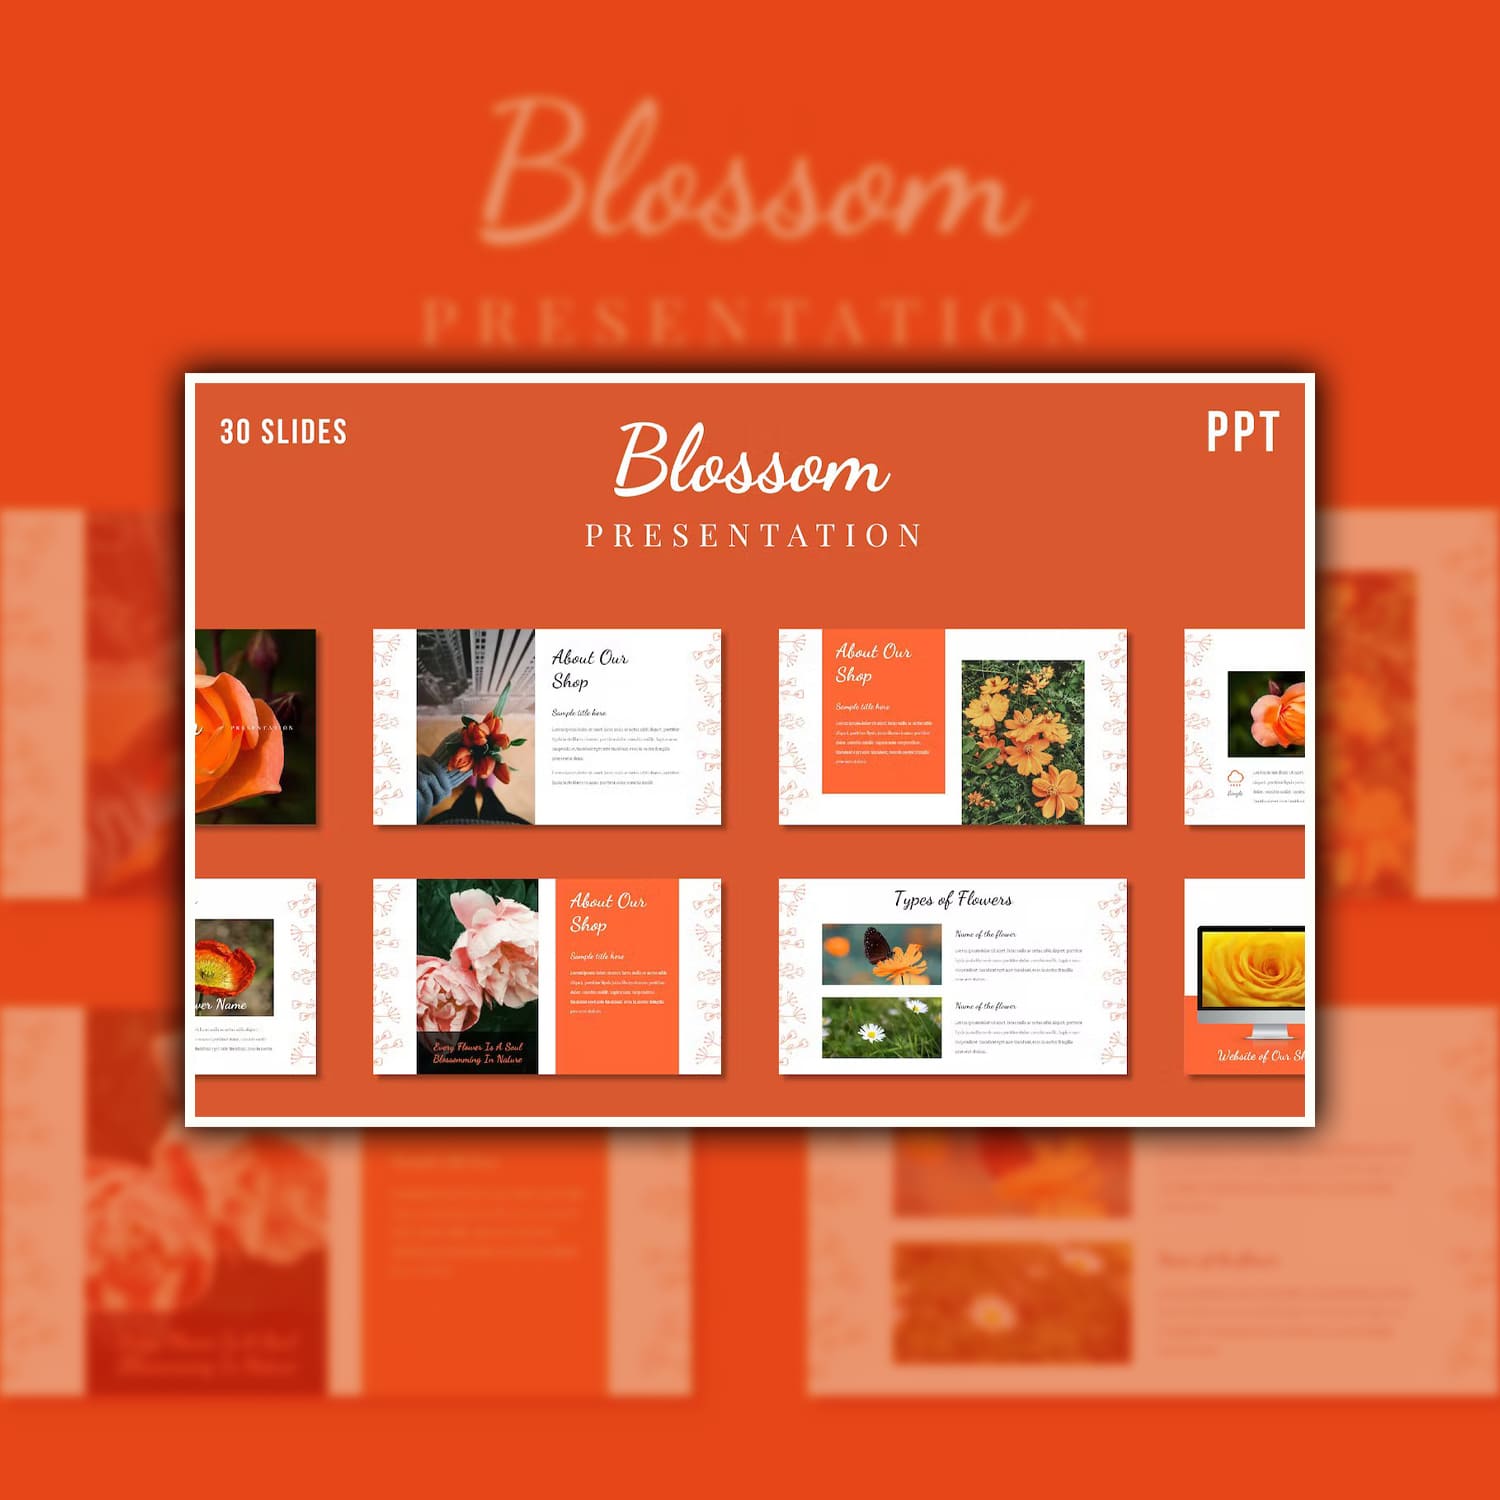 Collection of images of elegant presentation template slides on the theme of flowers.